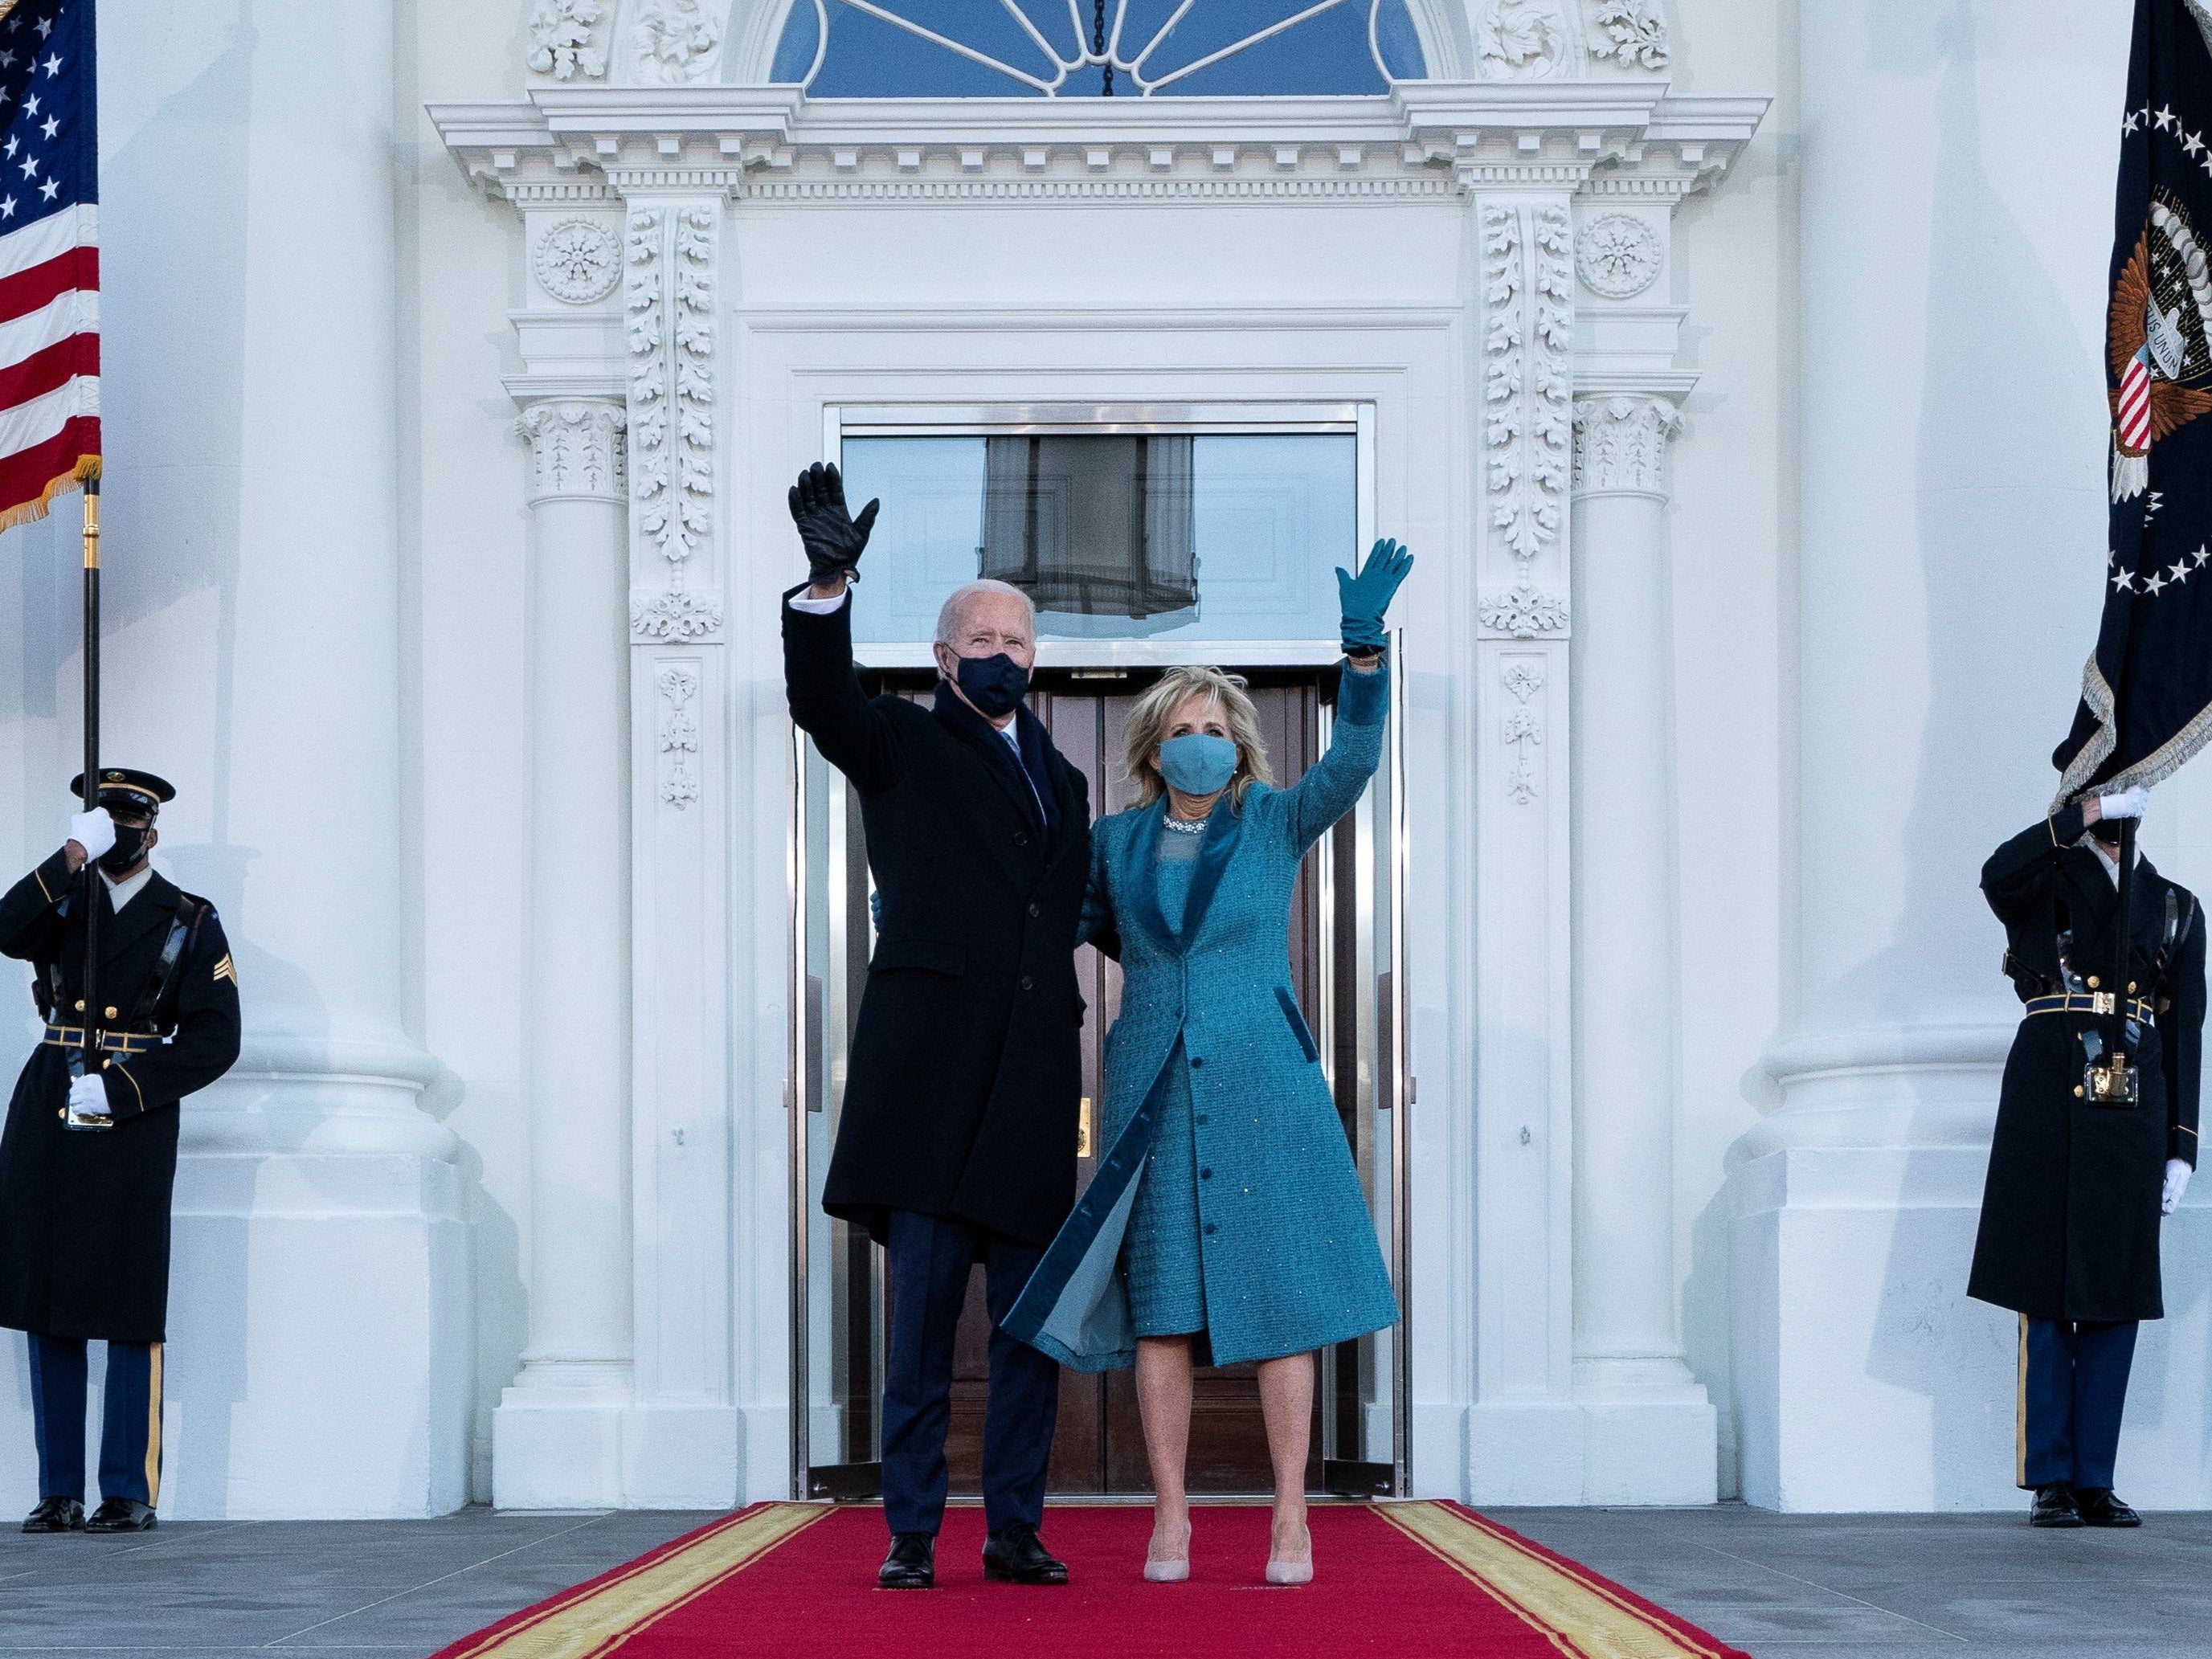 Joe Biden and Jill Biden wave as they arrive at the North Portico of the White House, which has had its 132 rooms deep cleaned since Donald Trump’s departure in light of the coronavirus pandemic